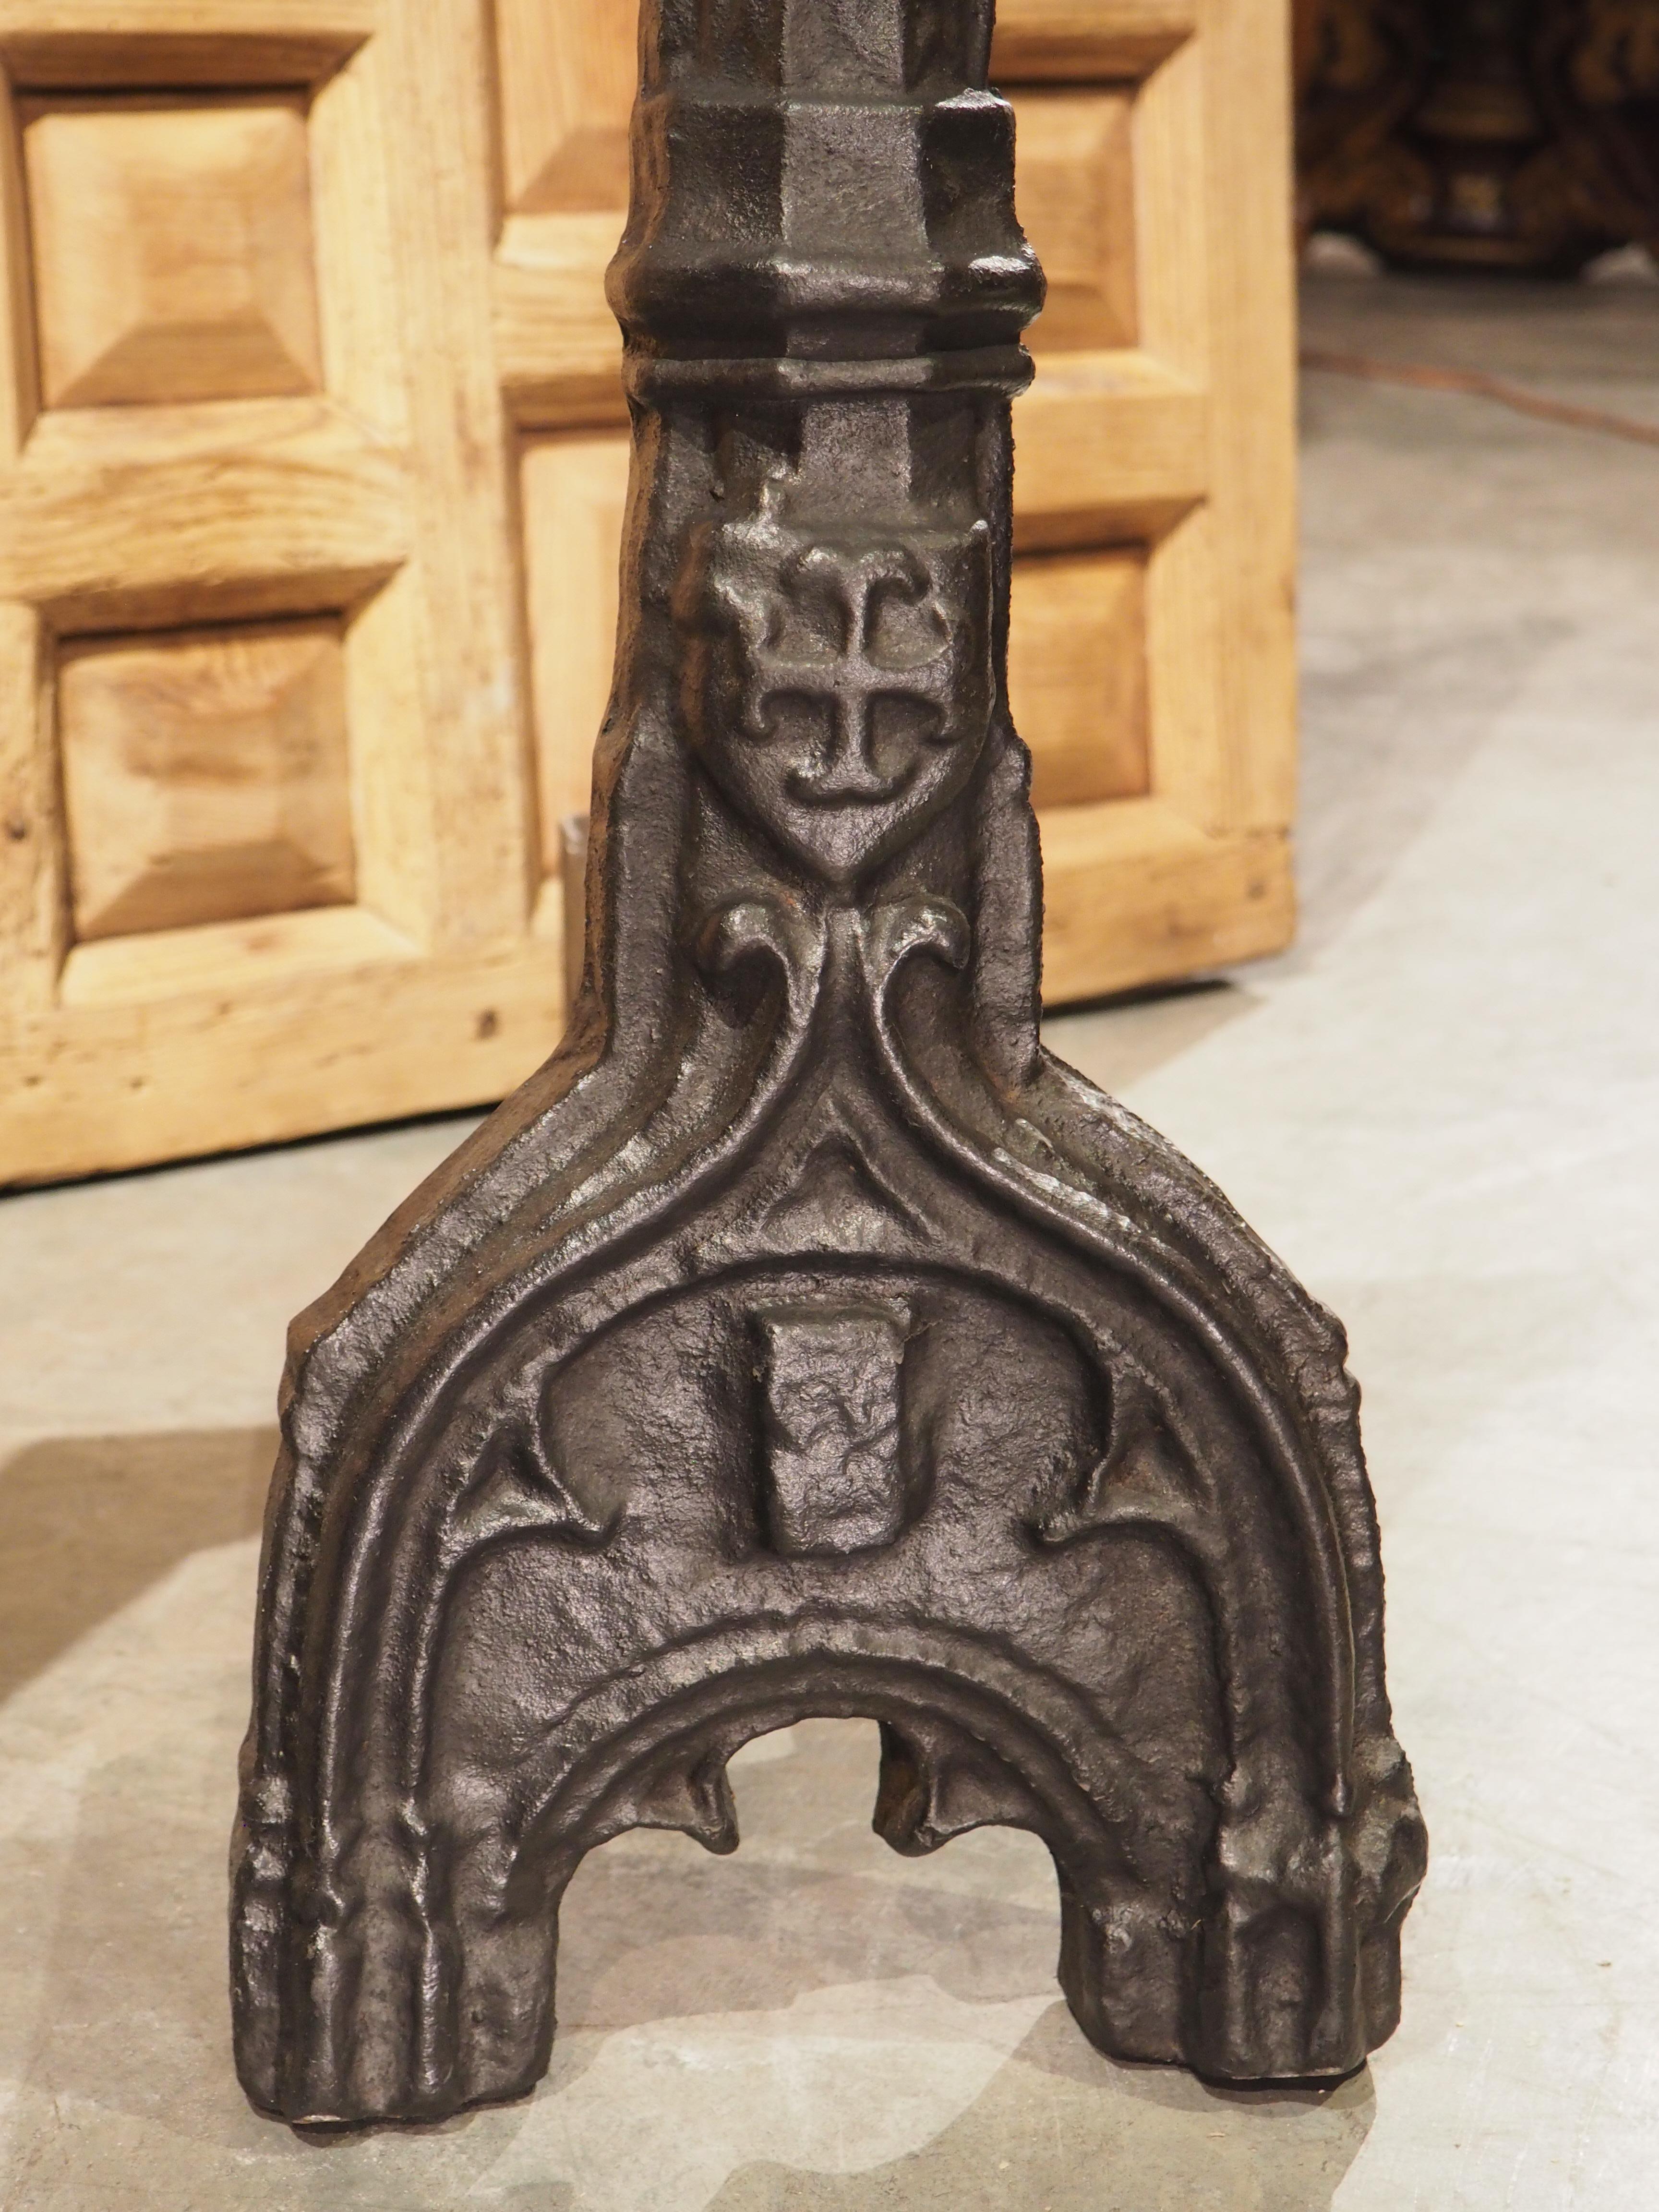 These important Gothic cast iron fireplace chenets are close to 500 years old. Sometimes called fire dogs or andirons, chenets are fireplace accessories designed to elevate firewood. This pair, which was produced in France in the 1500’s, measures